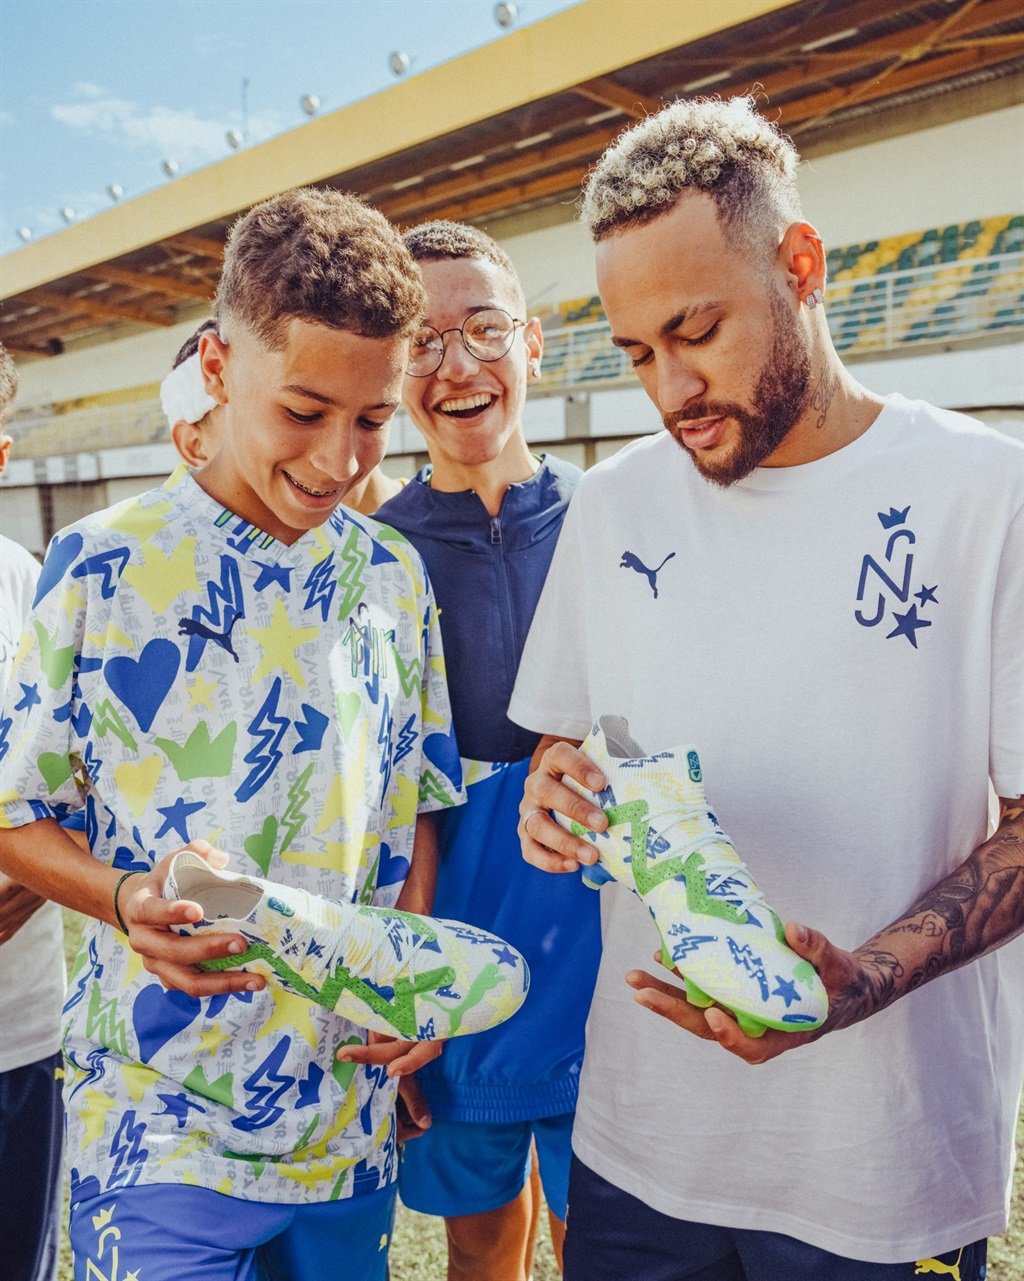 MLN on Instagram: Neymar launches his first @puma lifestyle collection,  celebrating his life's journey from São Vicente to Paris! The word  “Blessed” which he has tattooed on his back serves as a